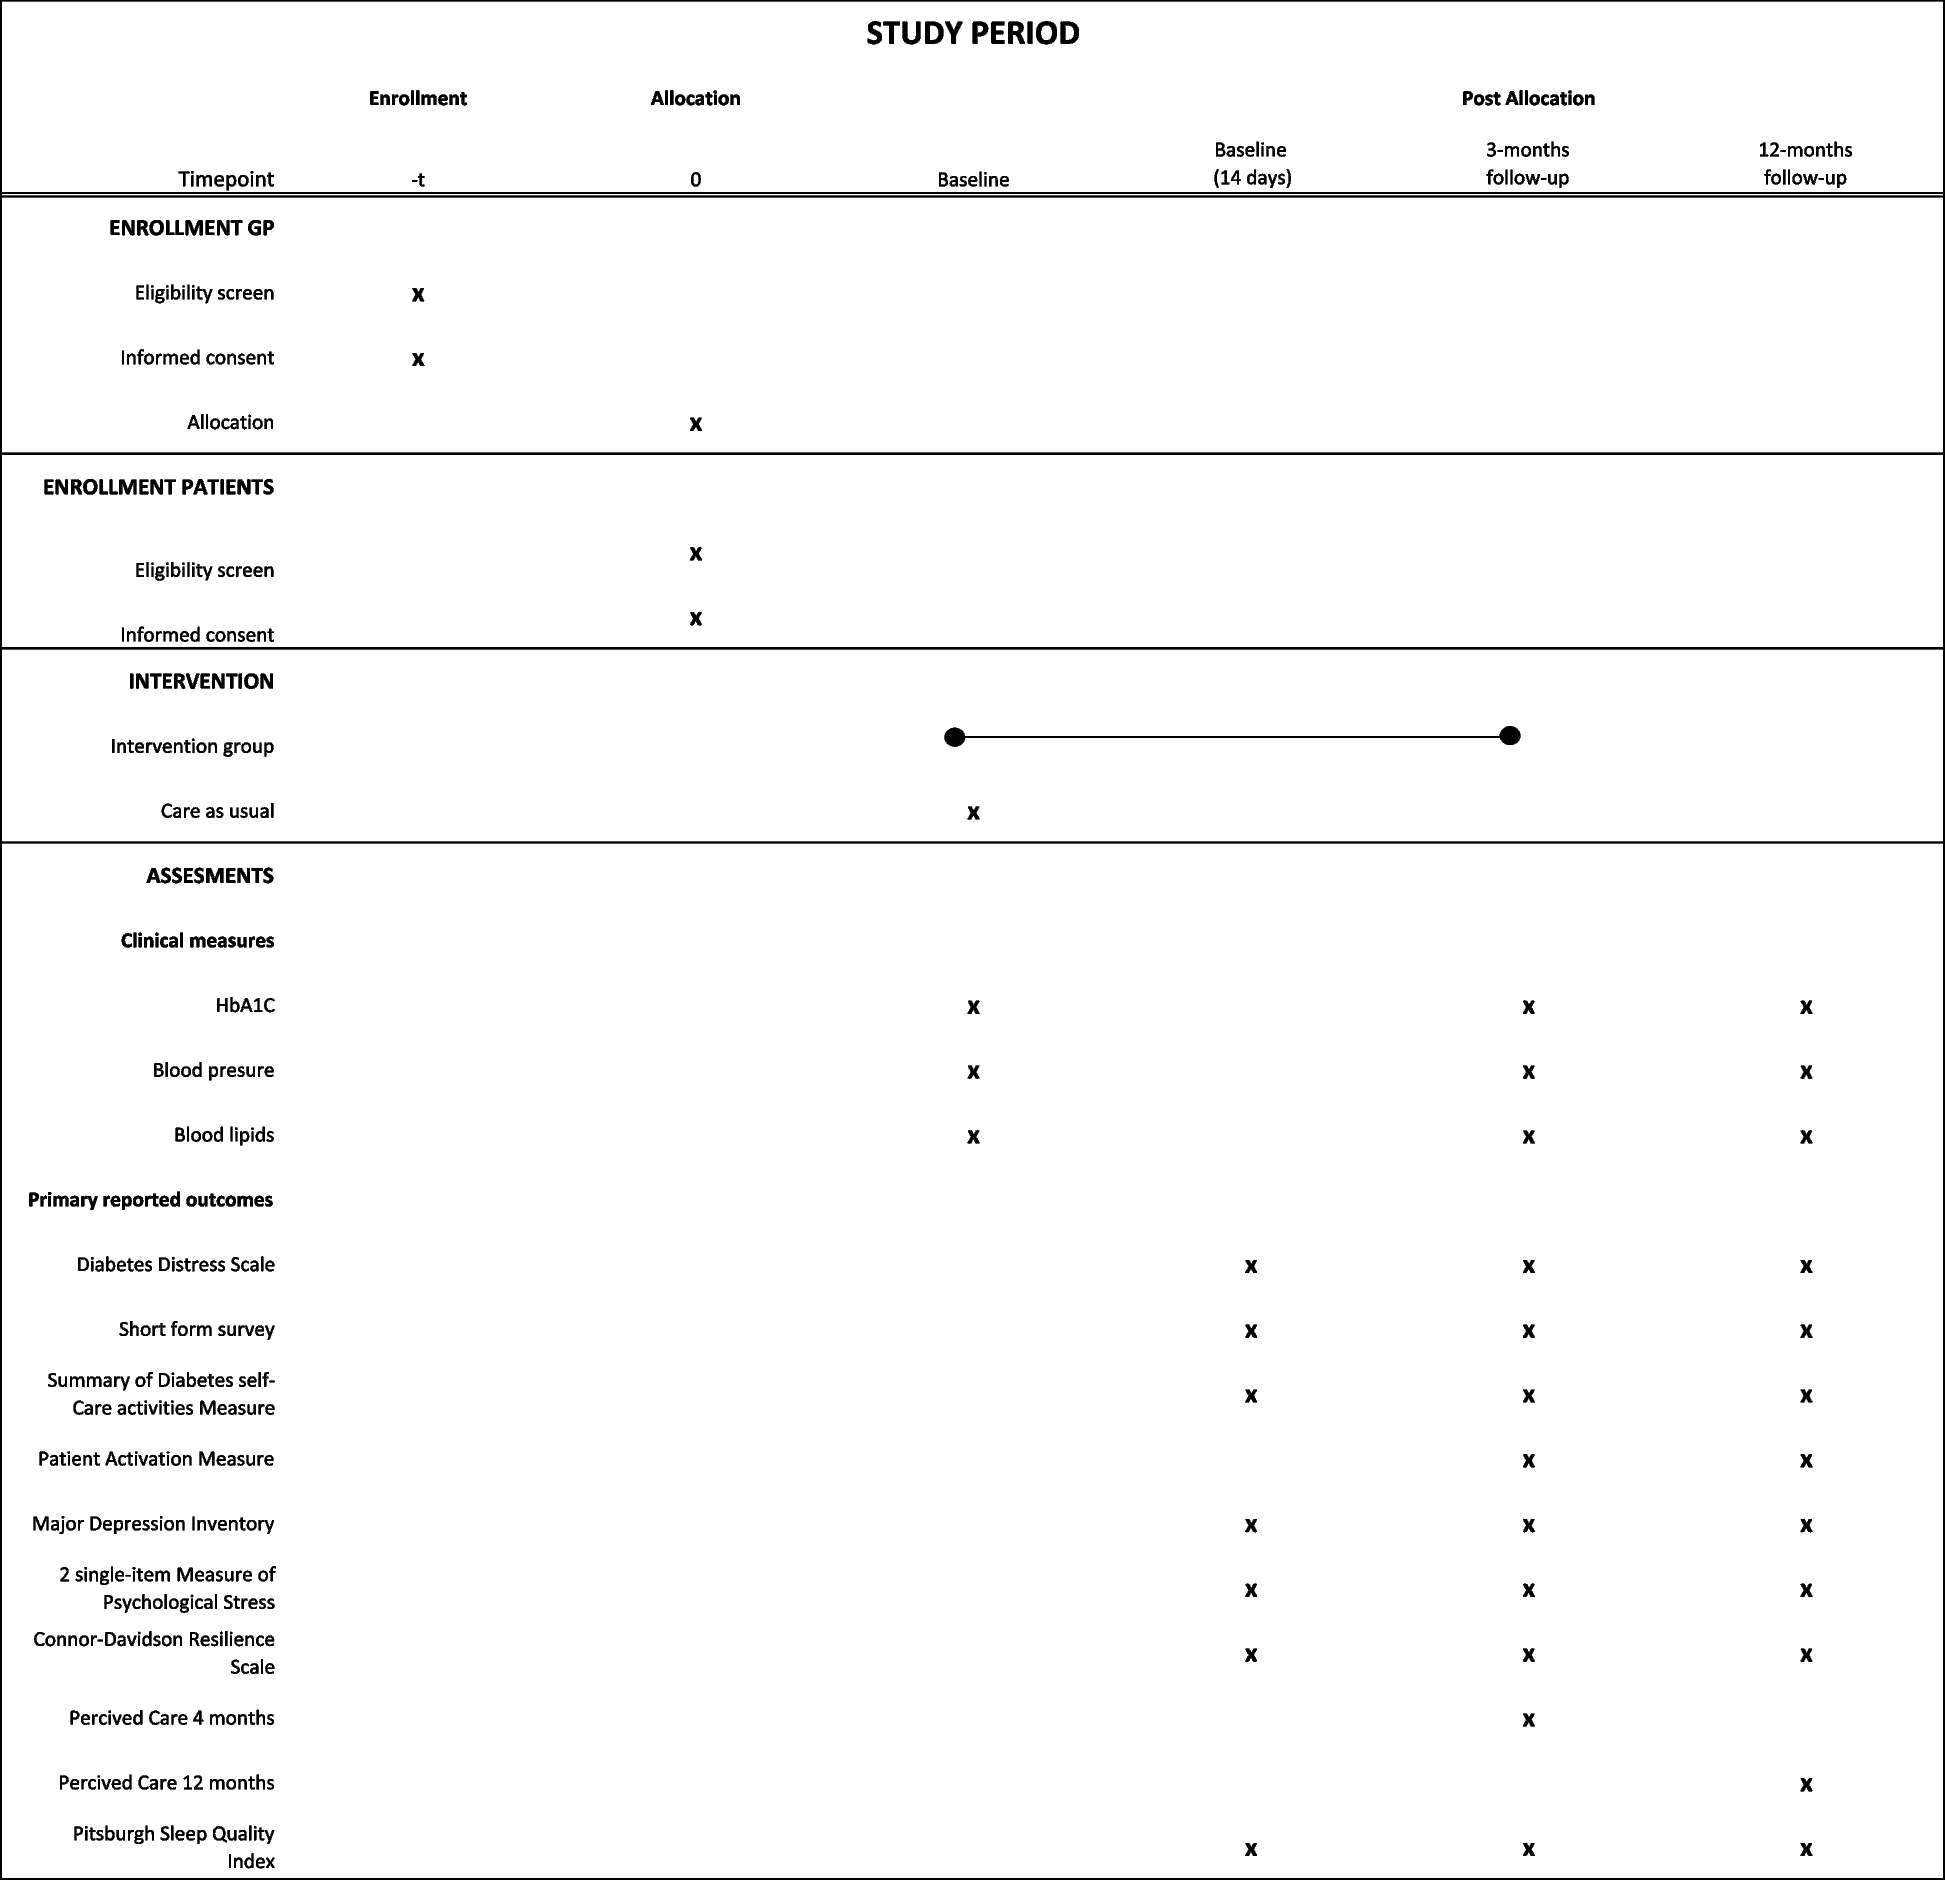 Effect of an entry-to-care intervention on diabetes distress in individuals with newly diagnosed type 2 diabetes: a study protocol for a cluster-randomized trial